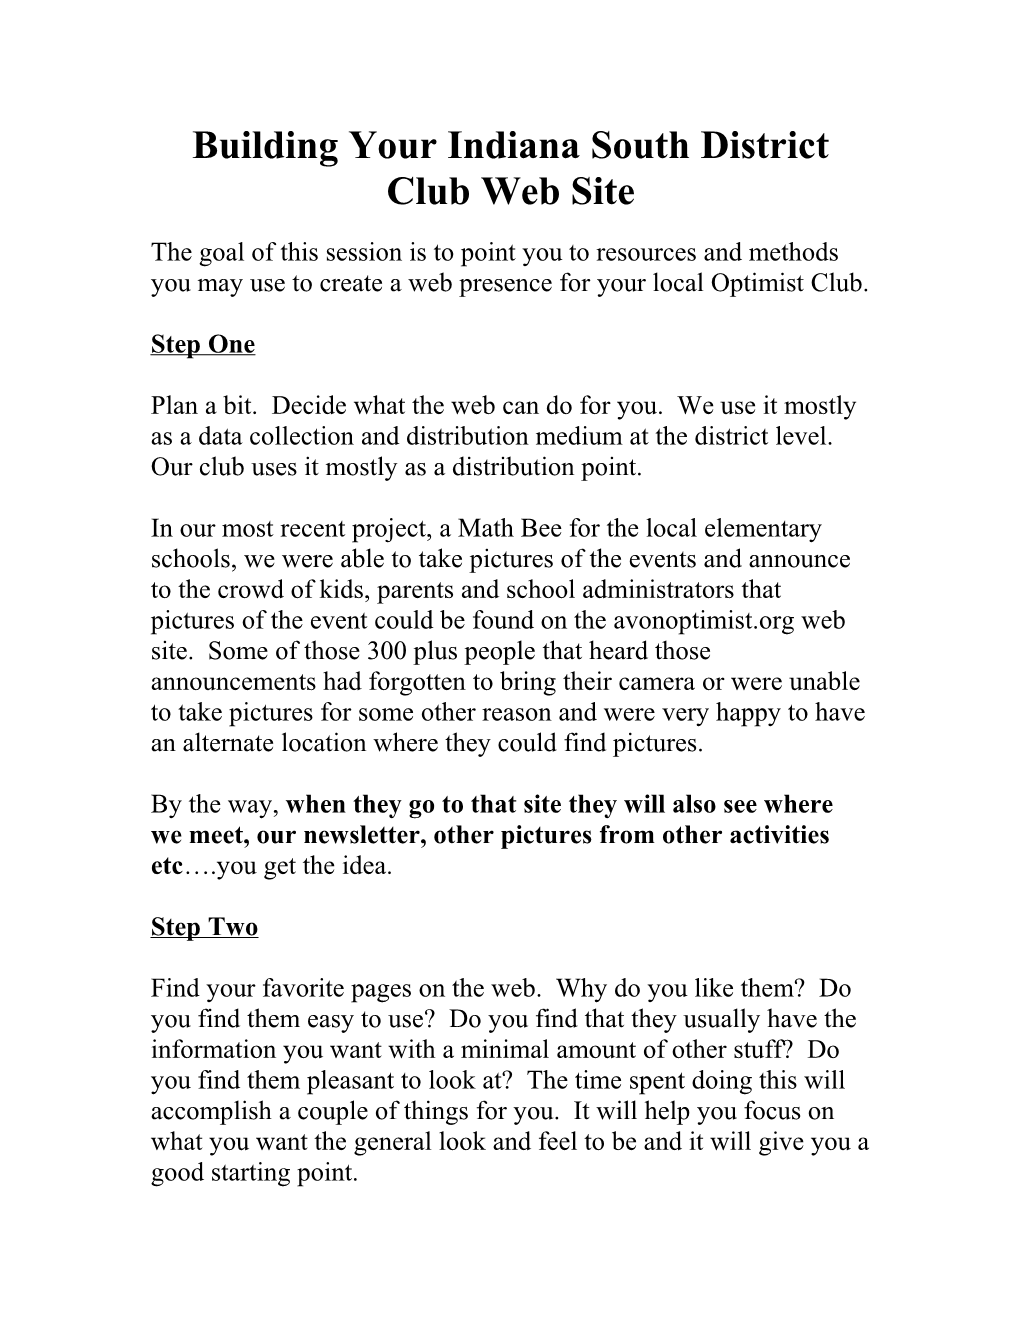 Building Your Indiana South District Club Web Site